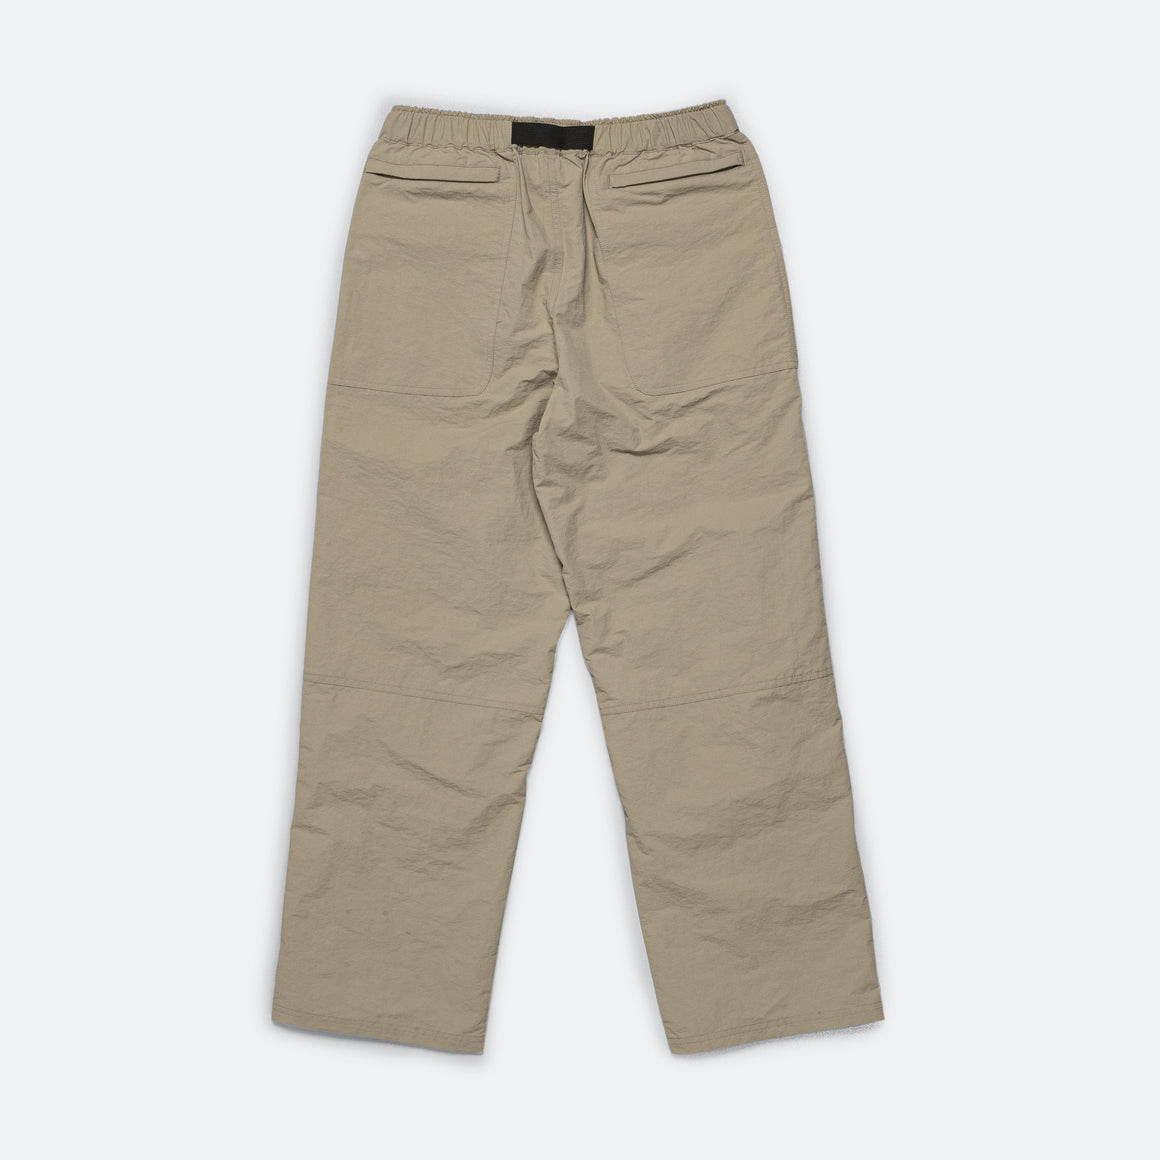 Checks - Articulated Climbing Pants - Sage Grey - UP THERE